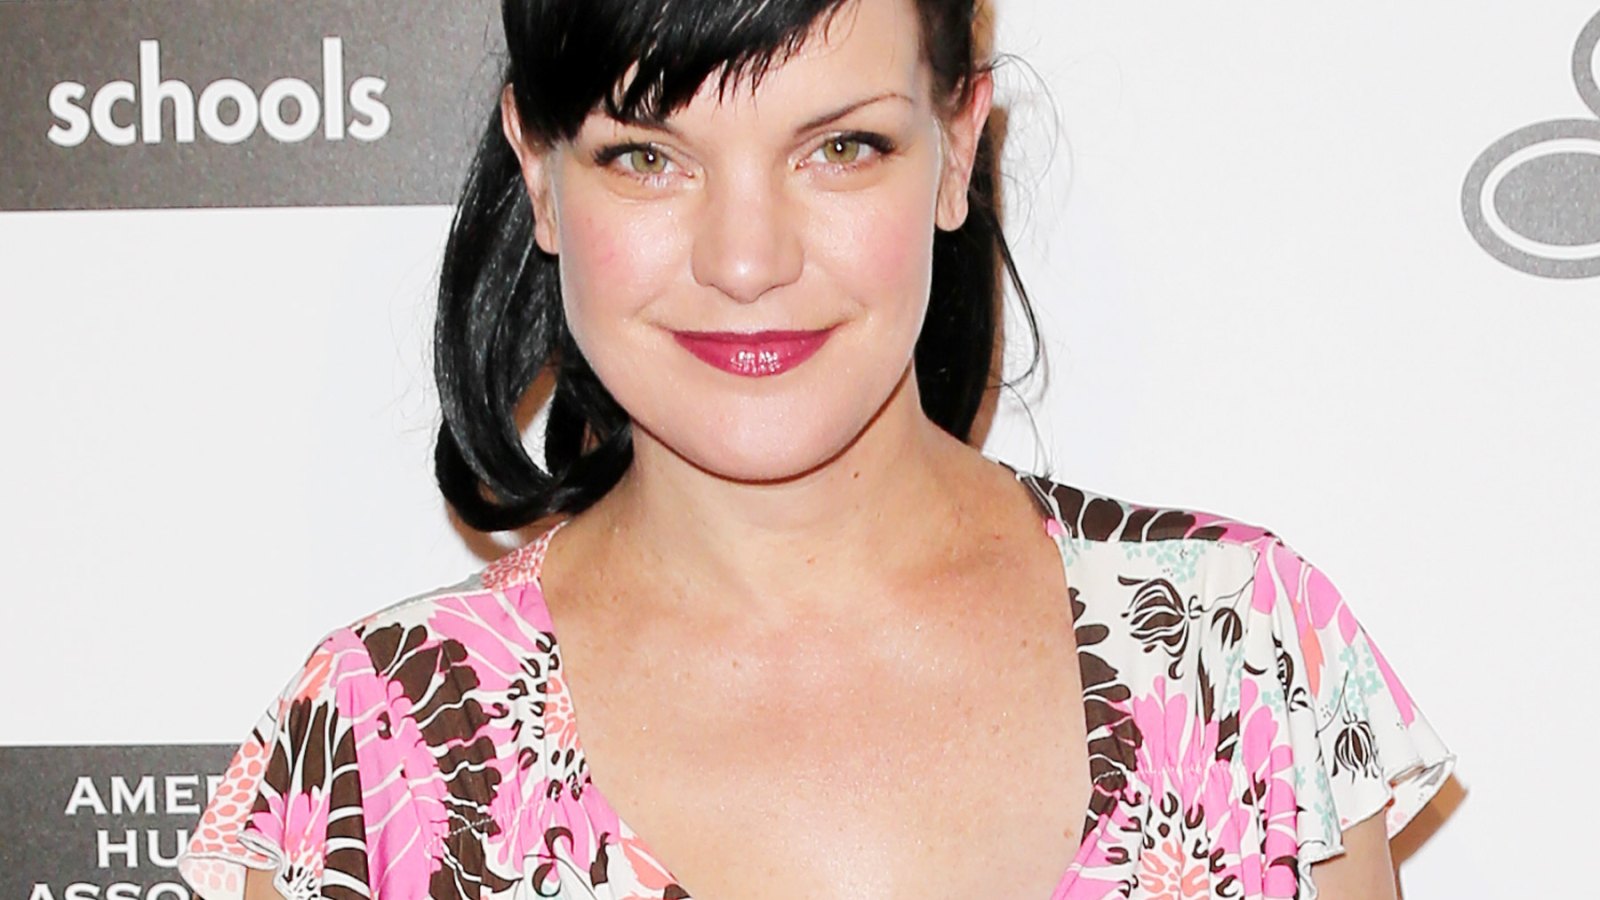 Pauley Perrette on October 5, 2013 in Beverly Hills, California